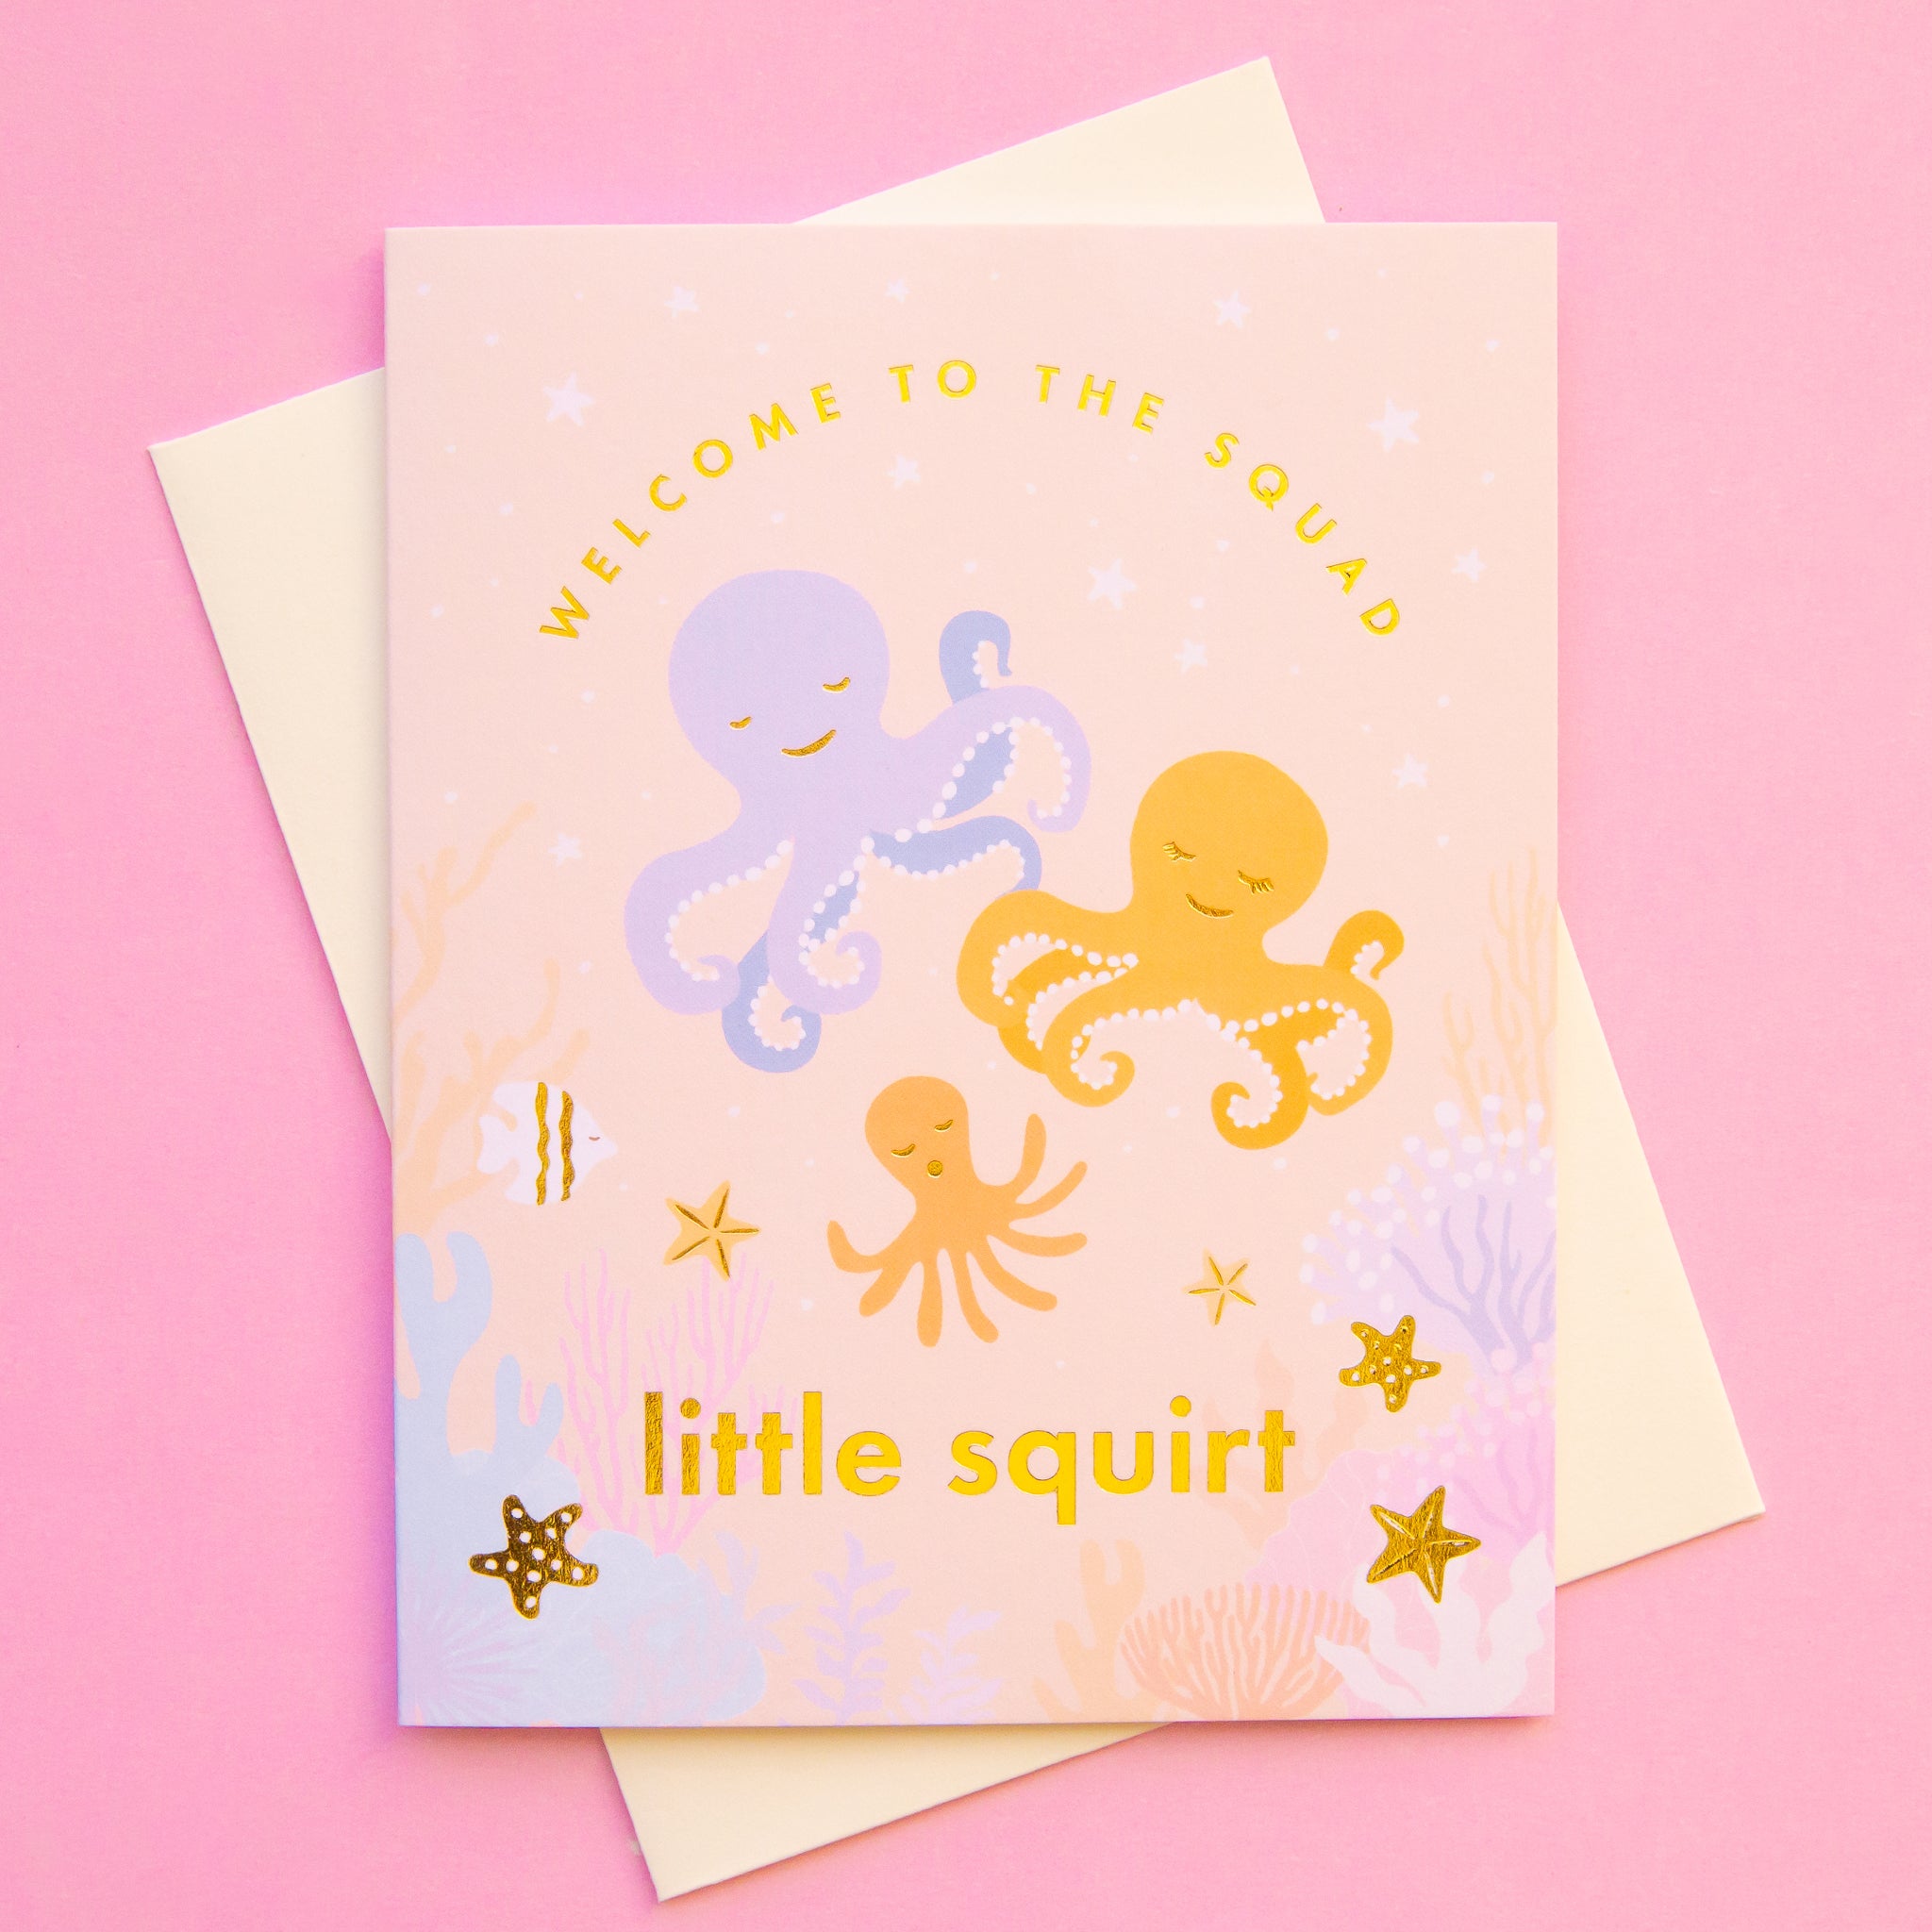 On a pink background is a light pink ish orange card with three illustrations of octopus and gold text that reads, "Welcome To The Squad little squirt".